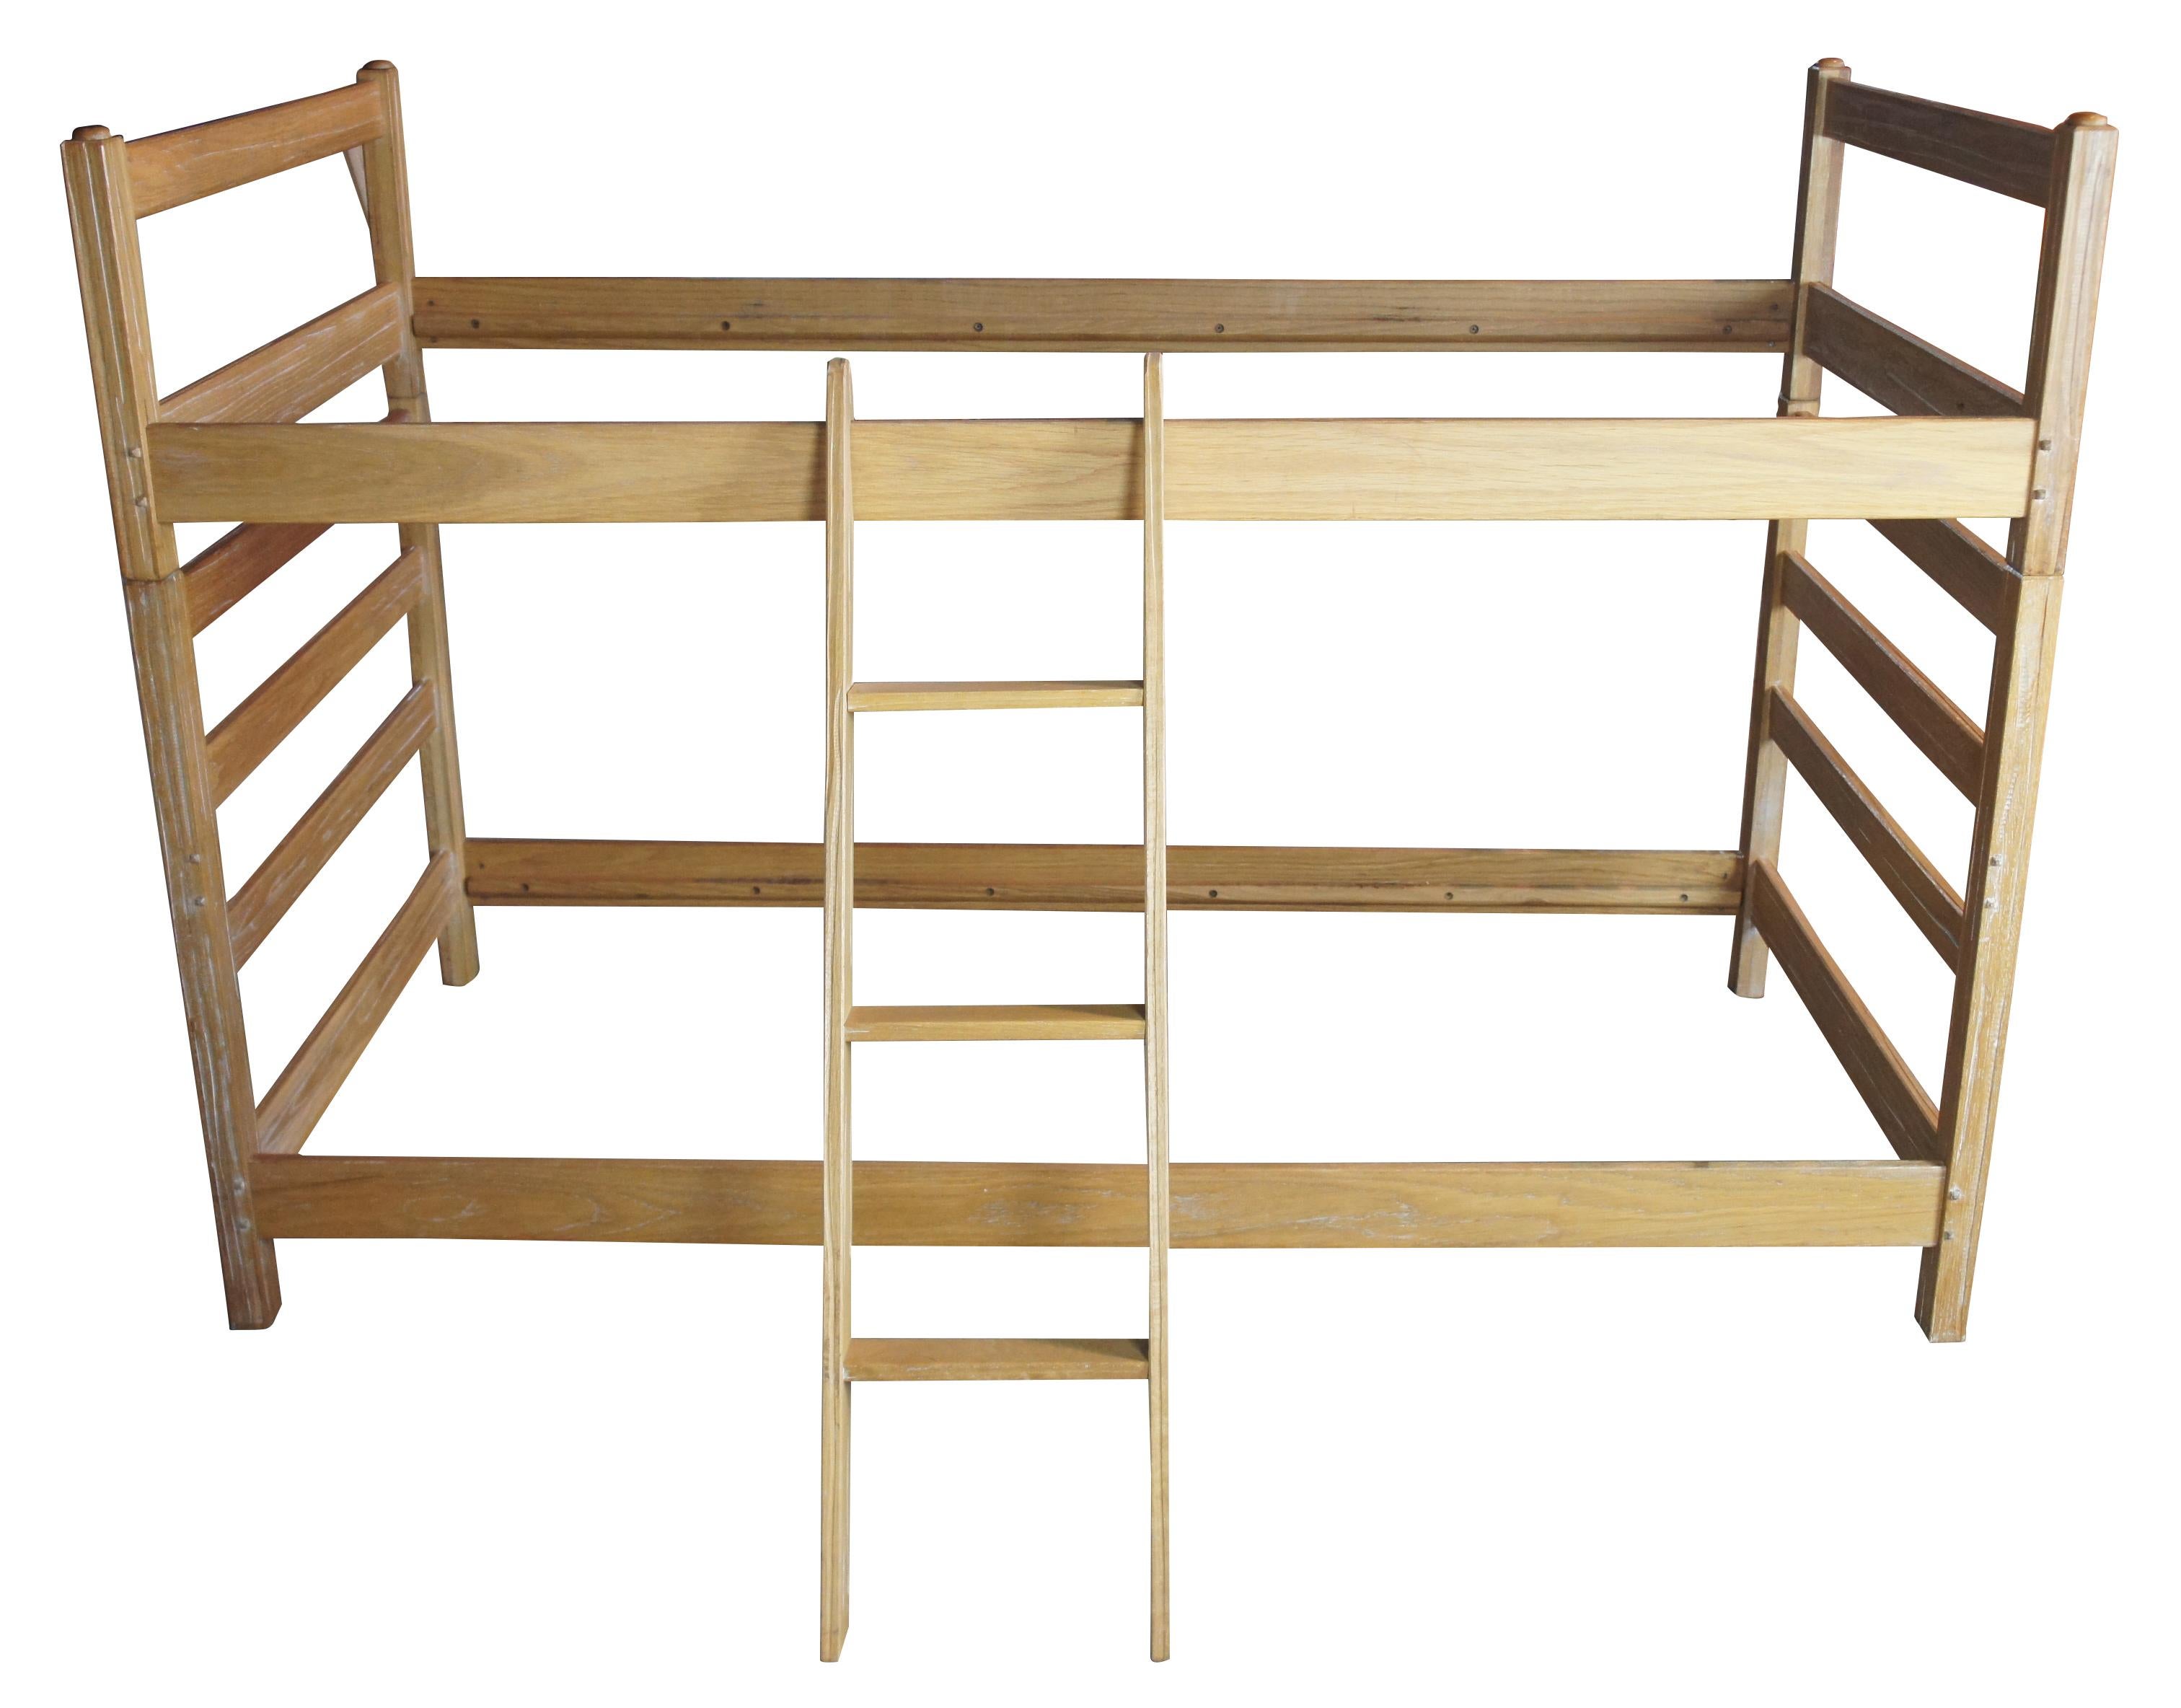 Vintage a Brandt ranch oak twin bed set ladder bunk or trundle beds southwestern

Ranch oak bed set by a brand out of Fort Worth, Texas, circa 1970s. A unique Southwestern design with oak construction. Capable of being used as bunk bed with ladder